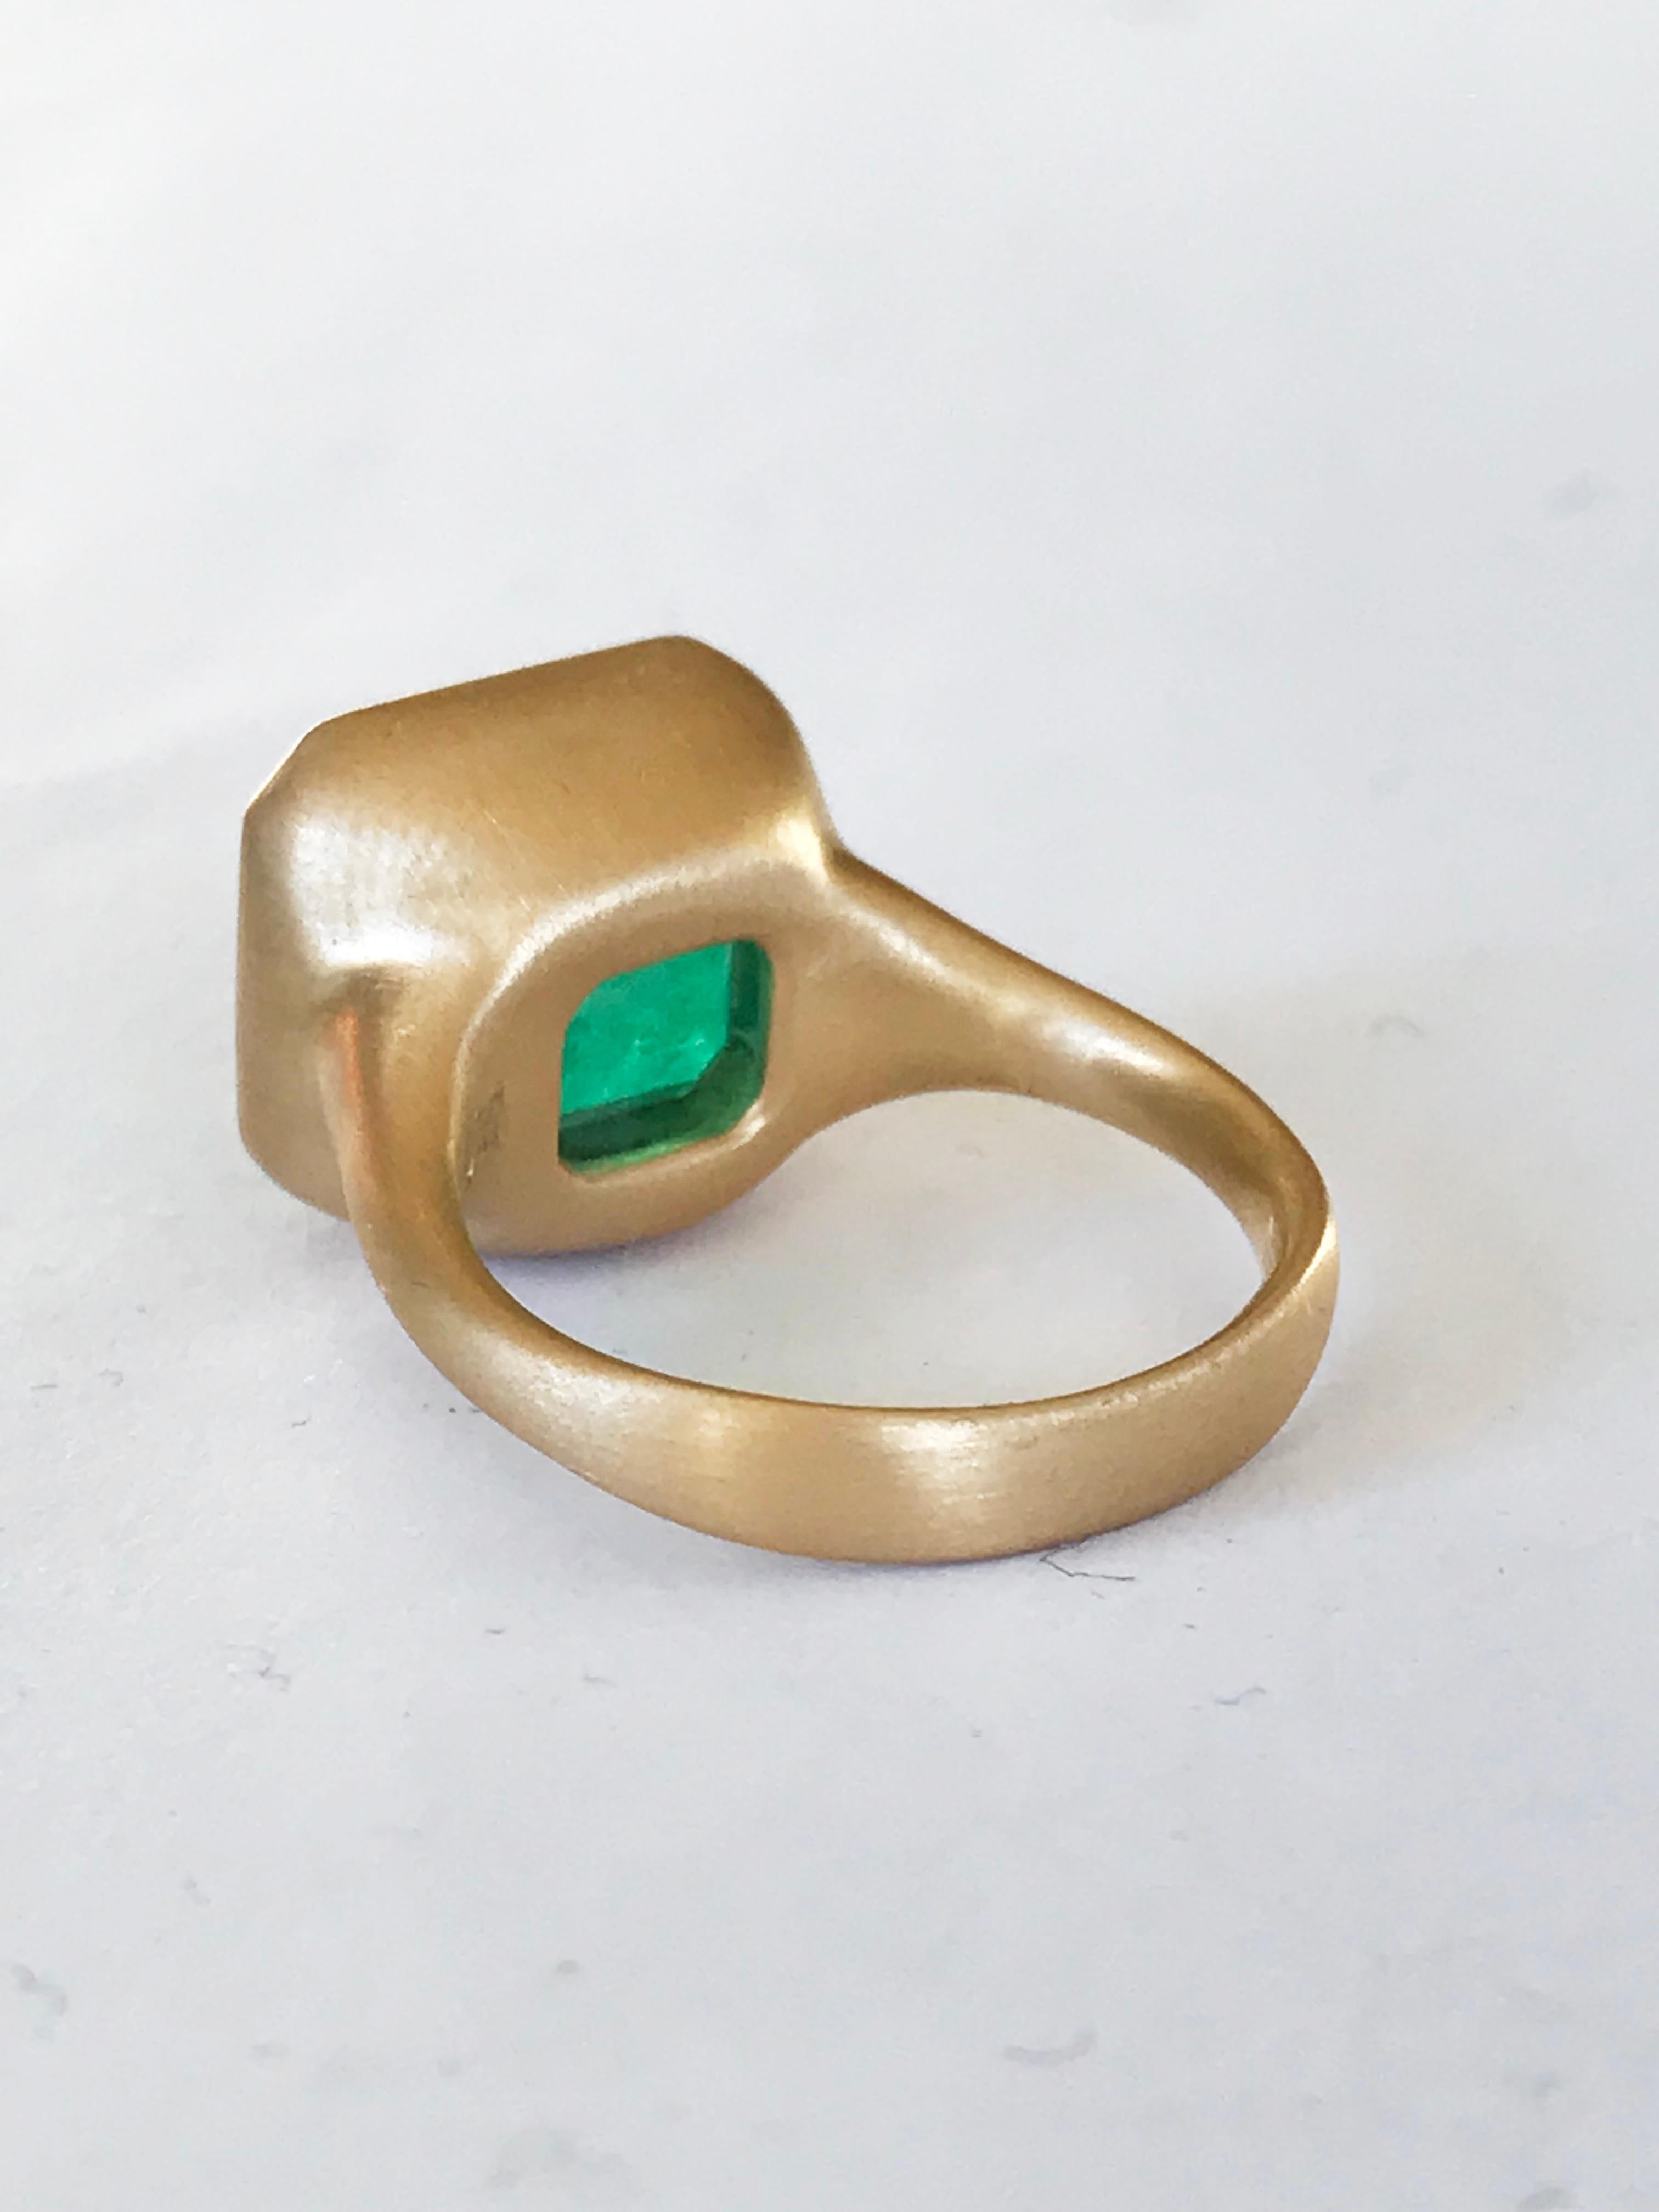 Dalben Magnificent 8.3 Carat Certified Colombian Emerald Yellow Gold Ring For Sale 5